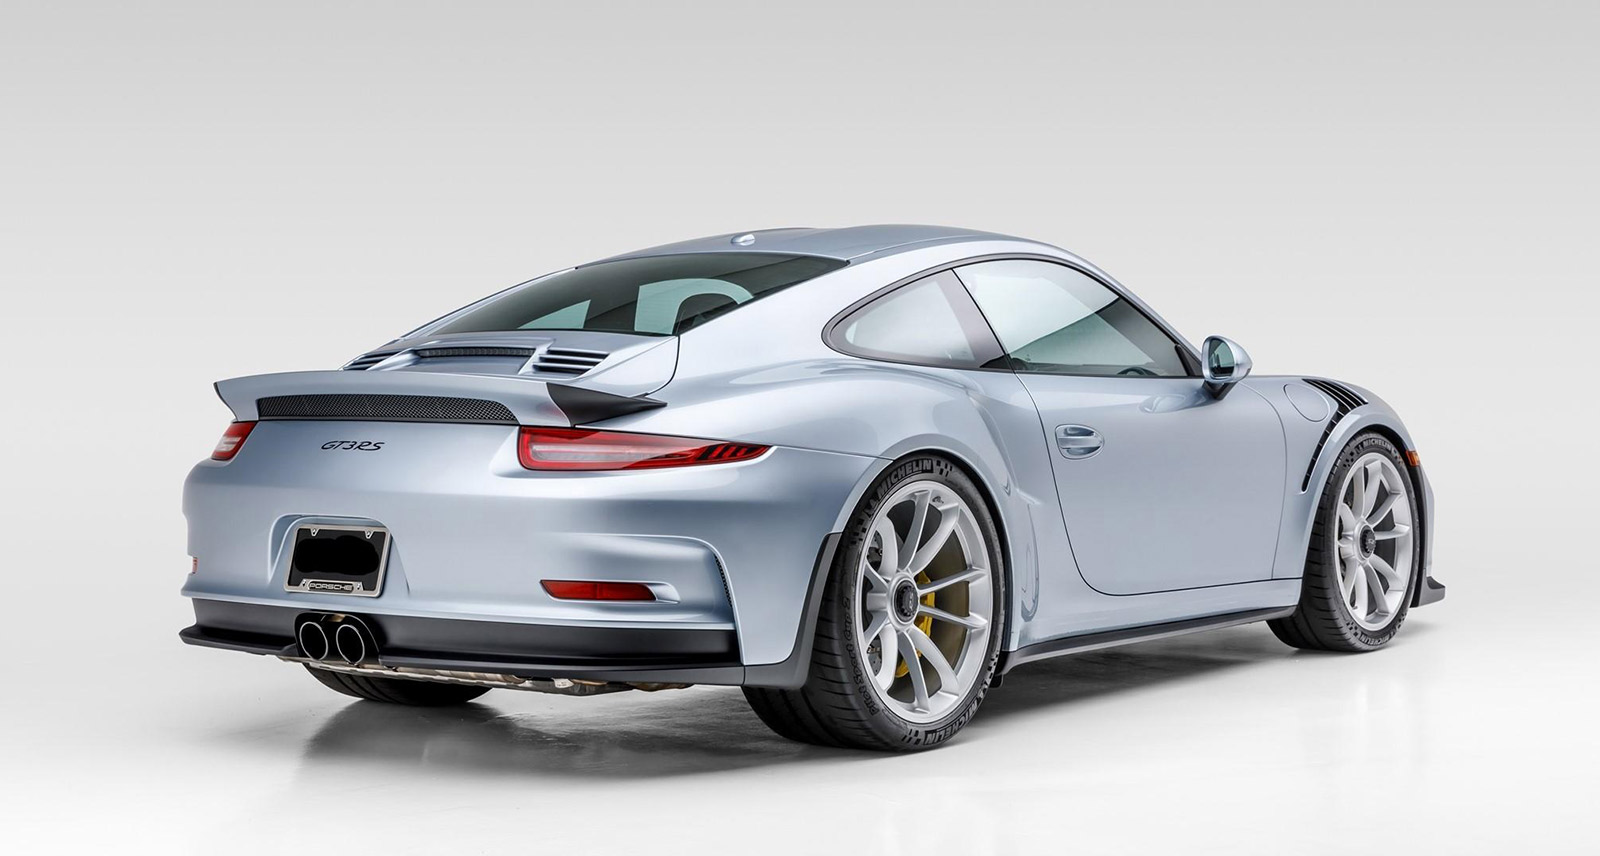 Porsche's Special Request Program Is Back – Here Are 5 Custom Cars to Get You Excited About It